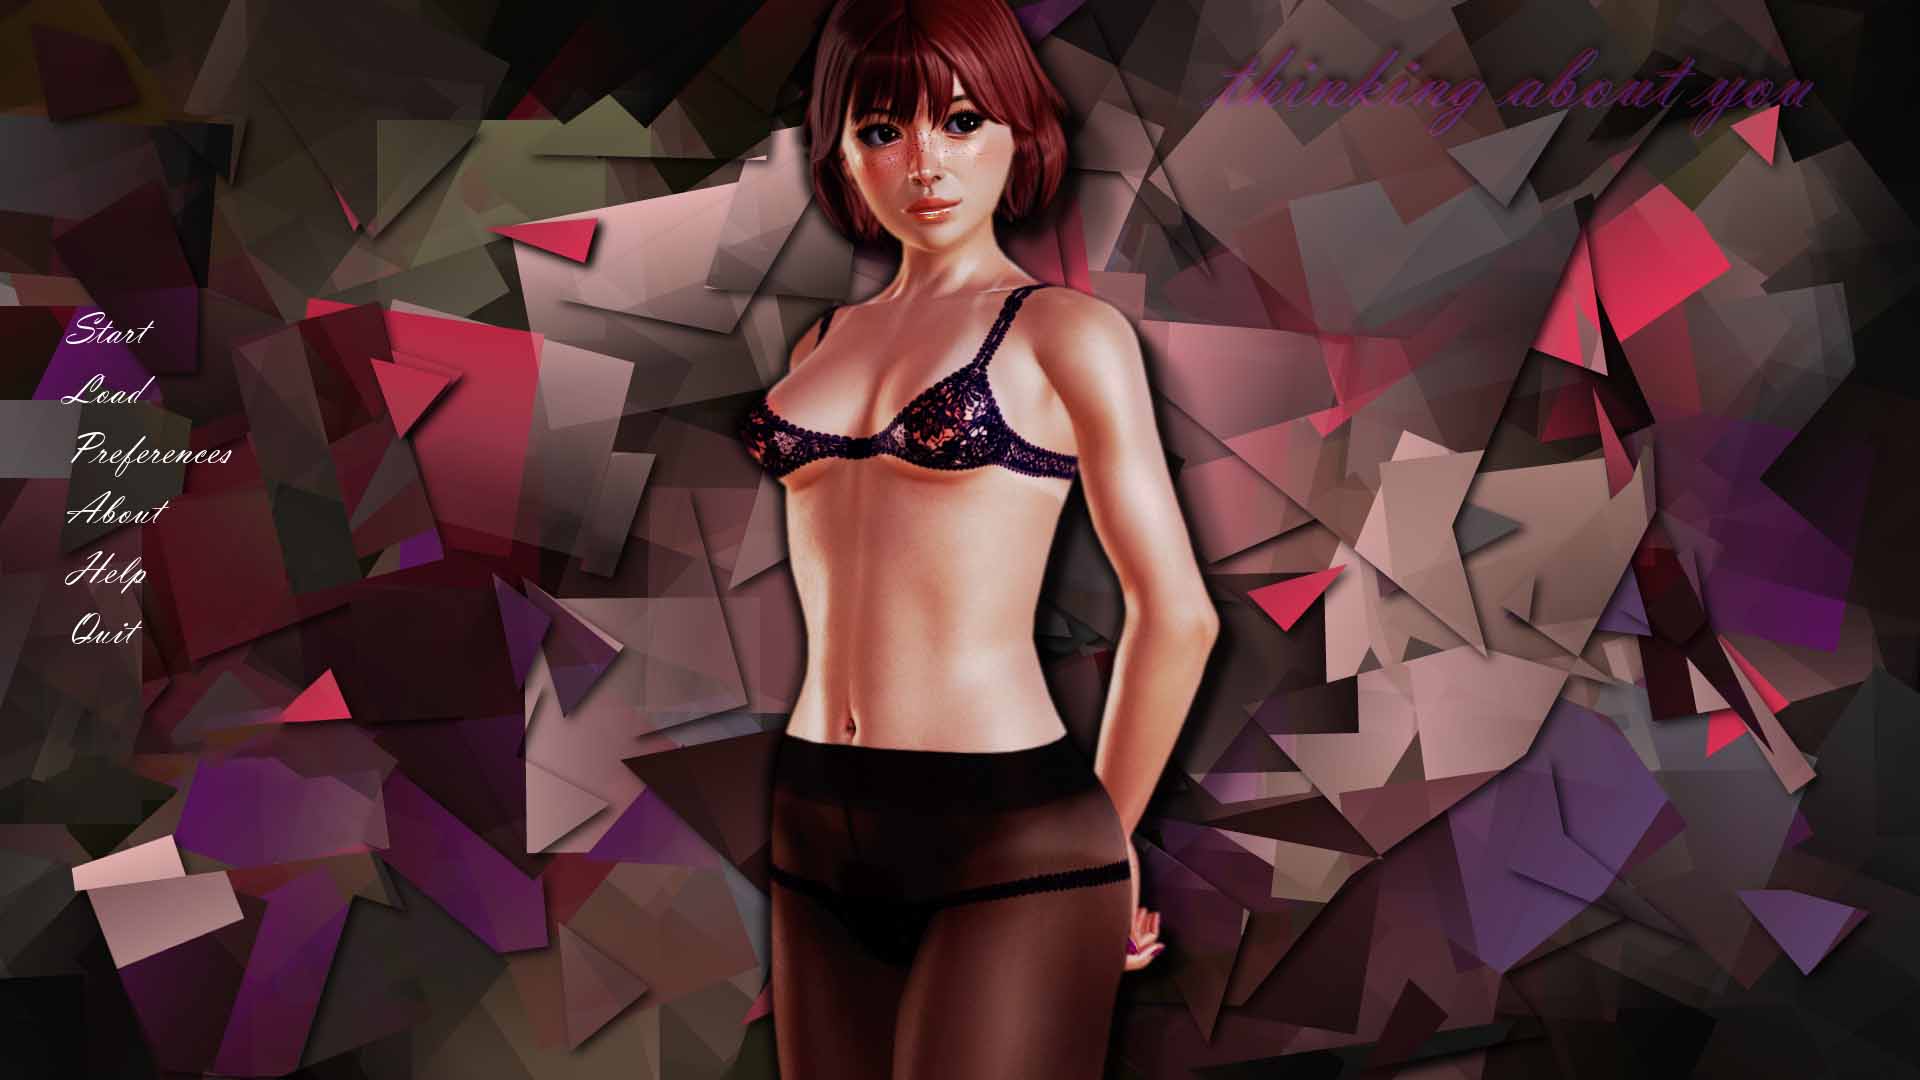 Thinking About You - 3D Adult Games